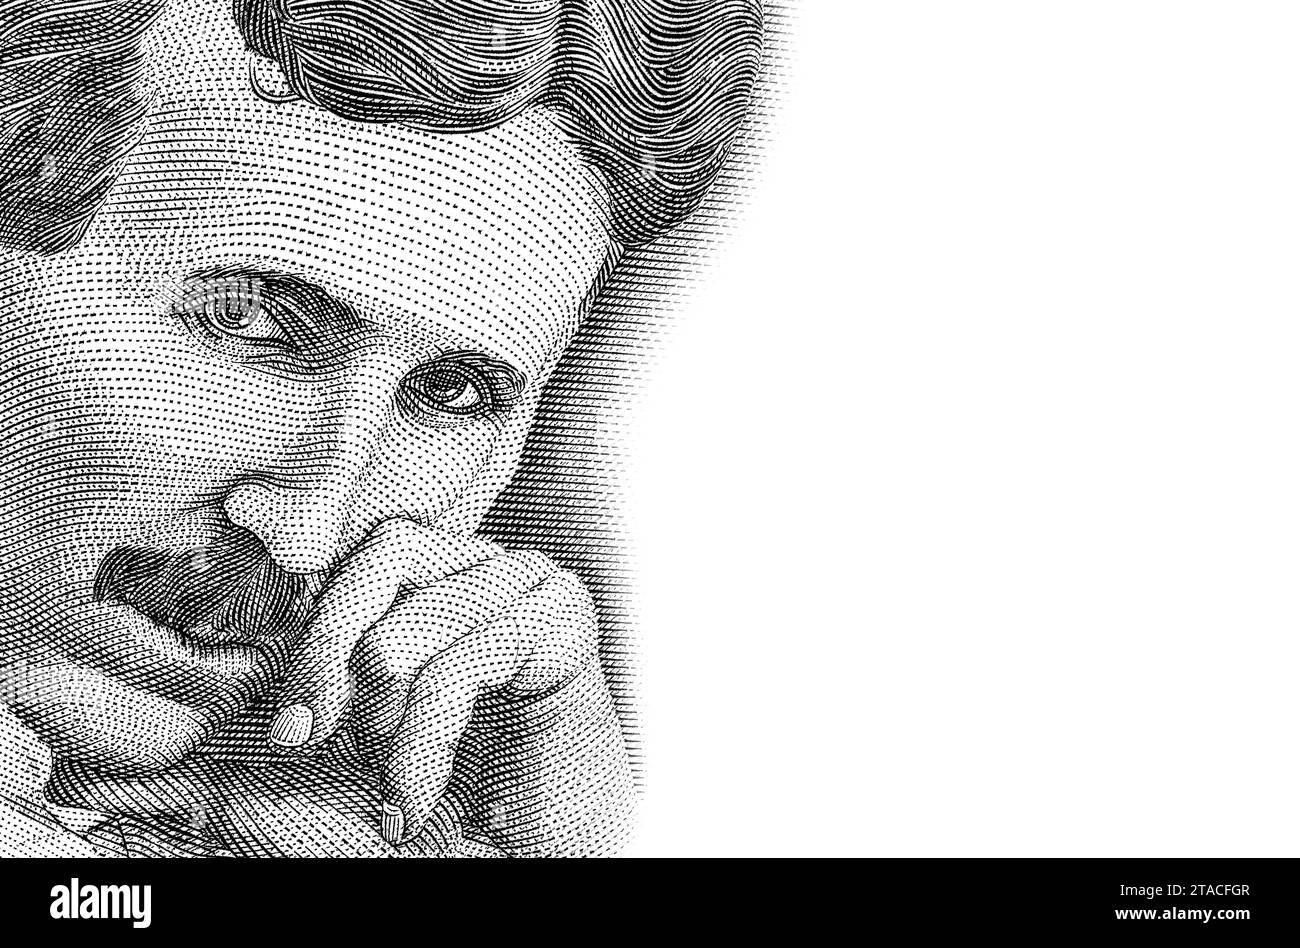 Nikola Tesla (1856 - 1943). Black and white portrait from Serbian banknote. Genius scientist, inventor, electrical engineer, mechanical engineer, and Stock Photo